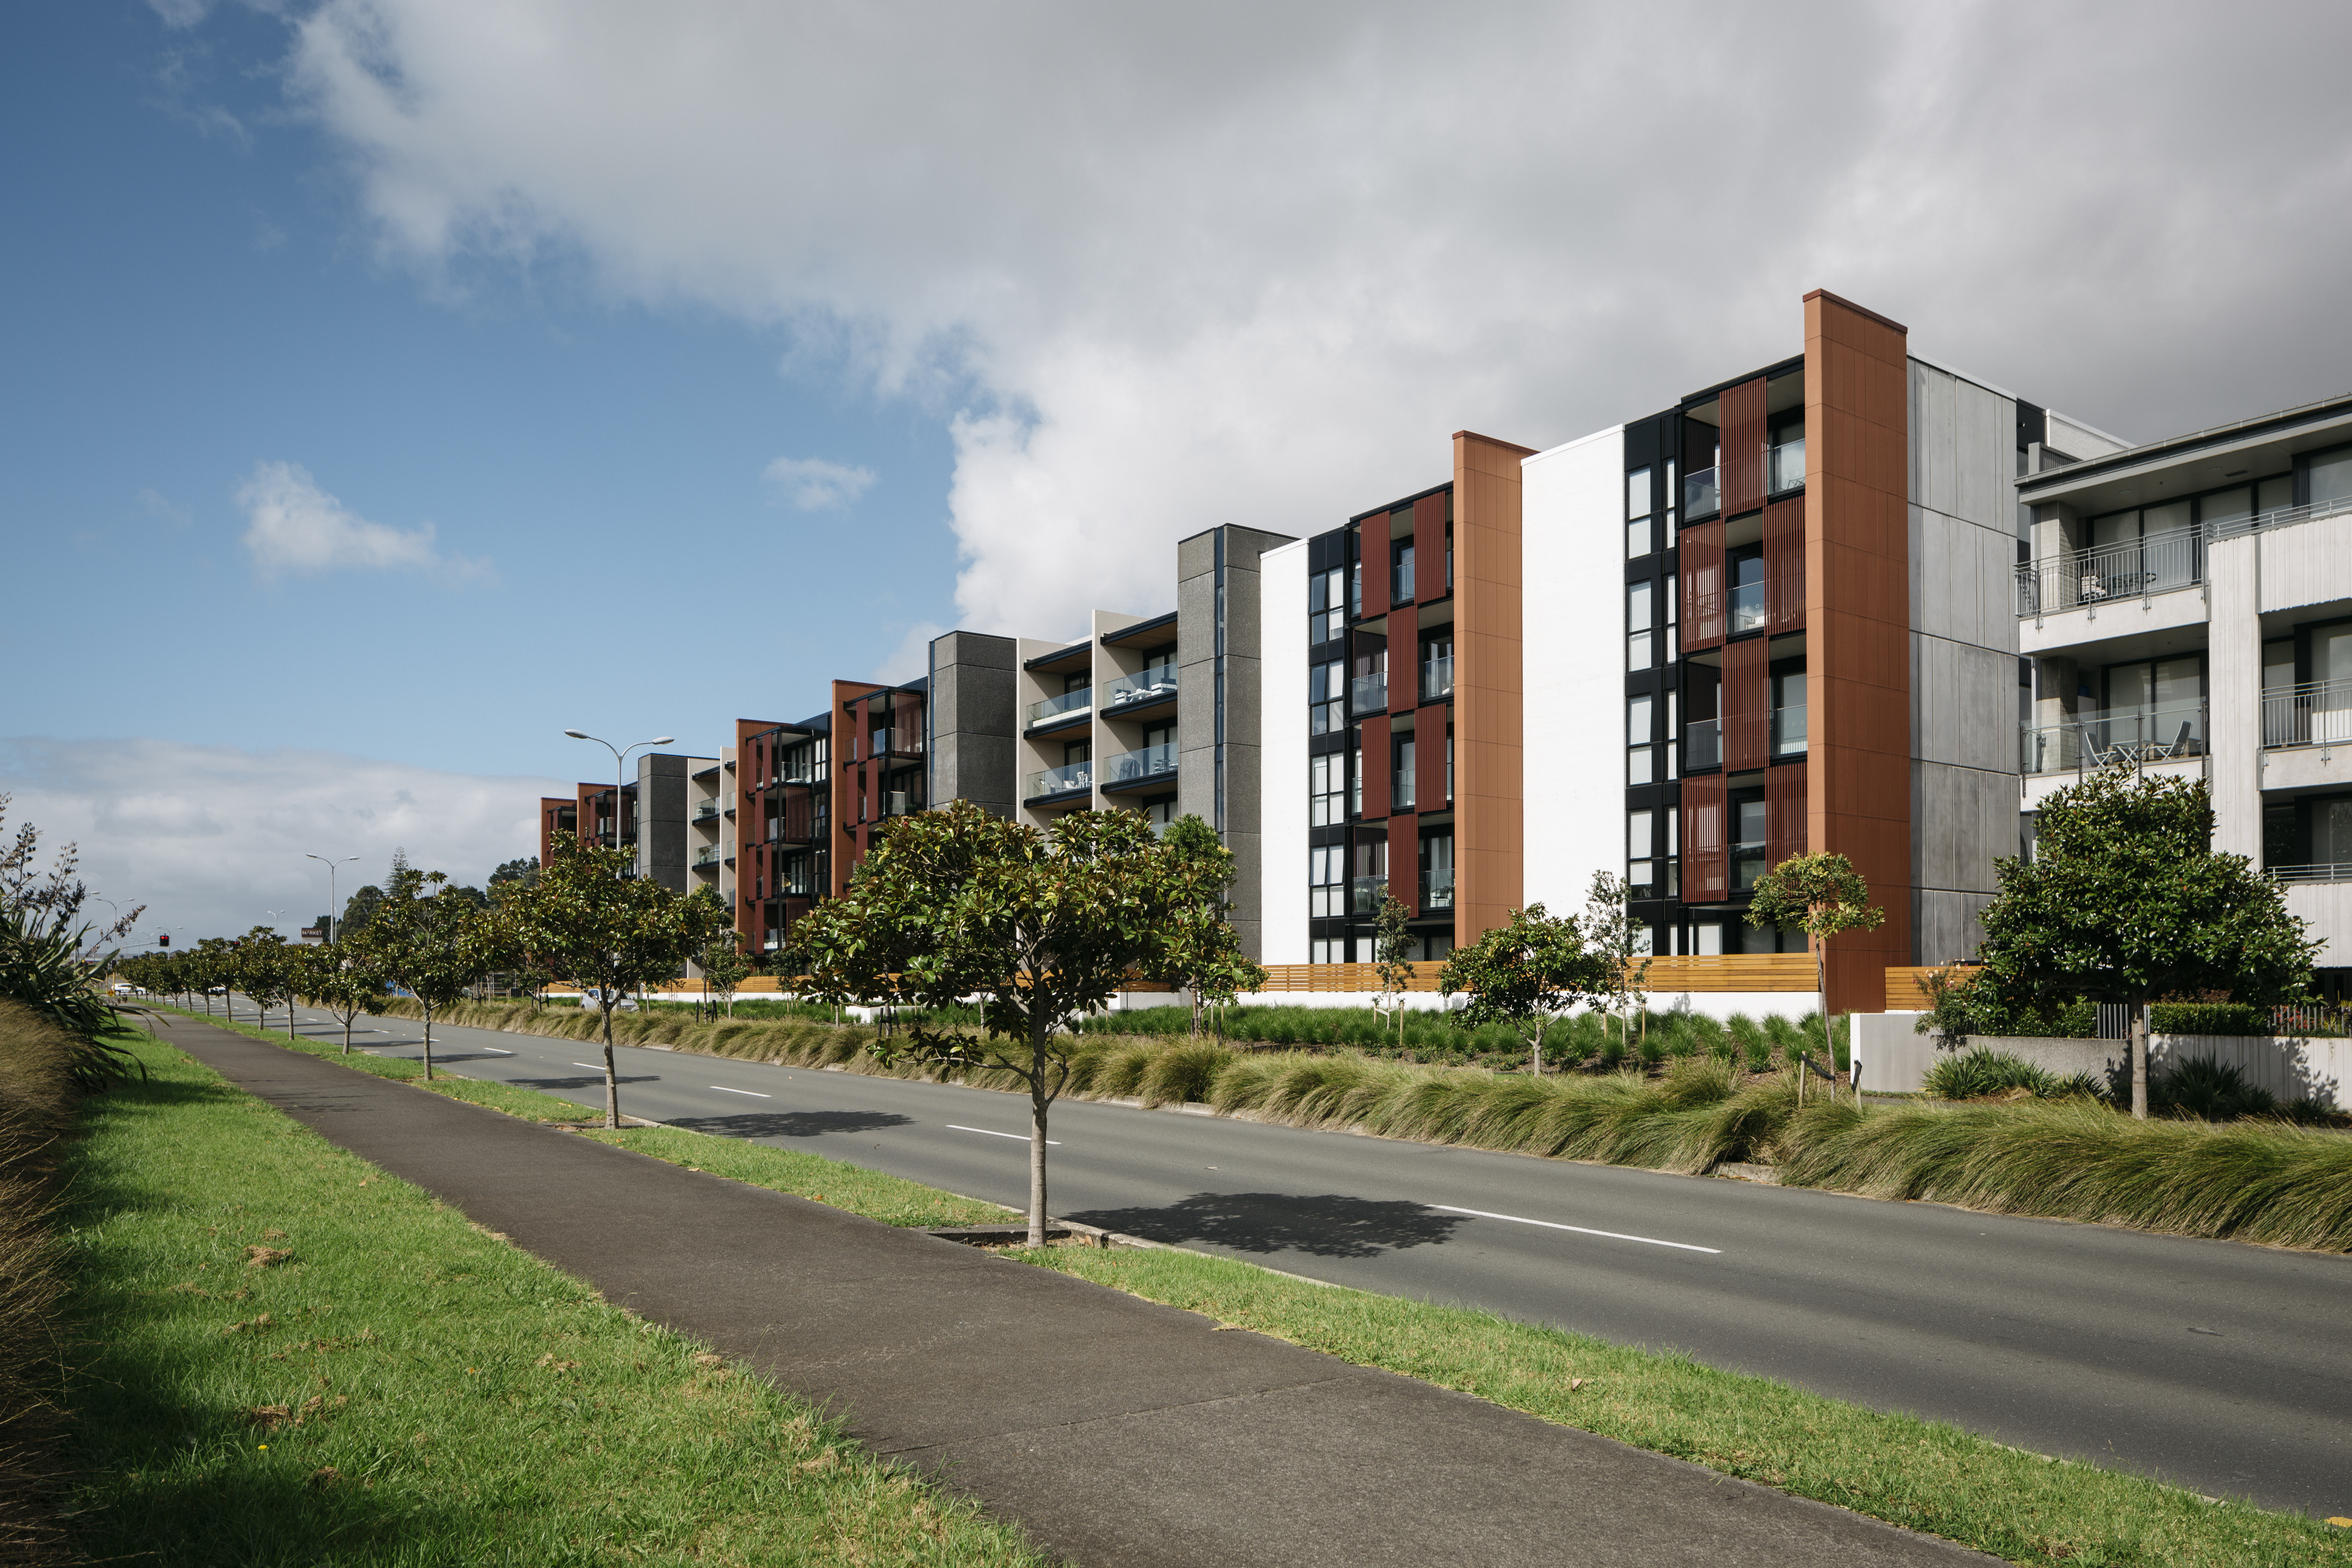 Picture shows a row of apartments on a street on a sunny day. Apartments are one of the housing choices residents of Auckland have.